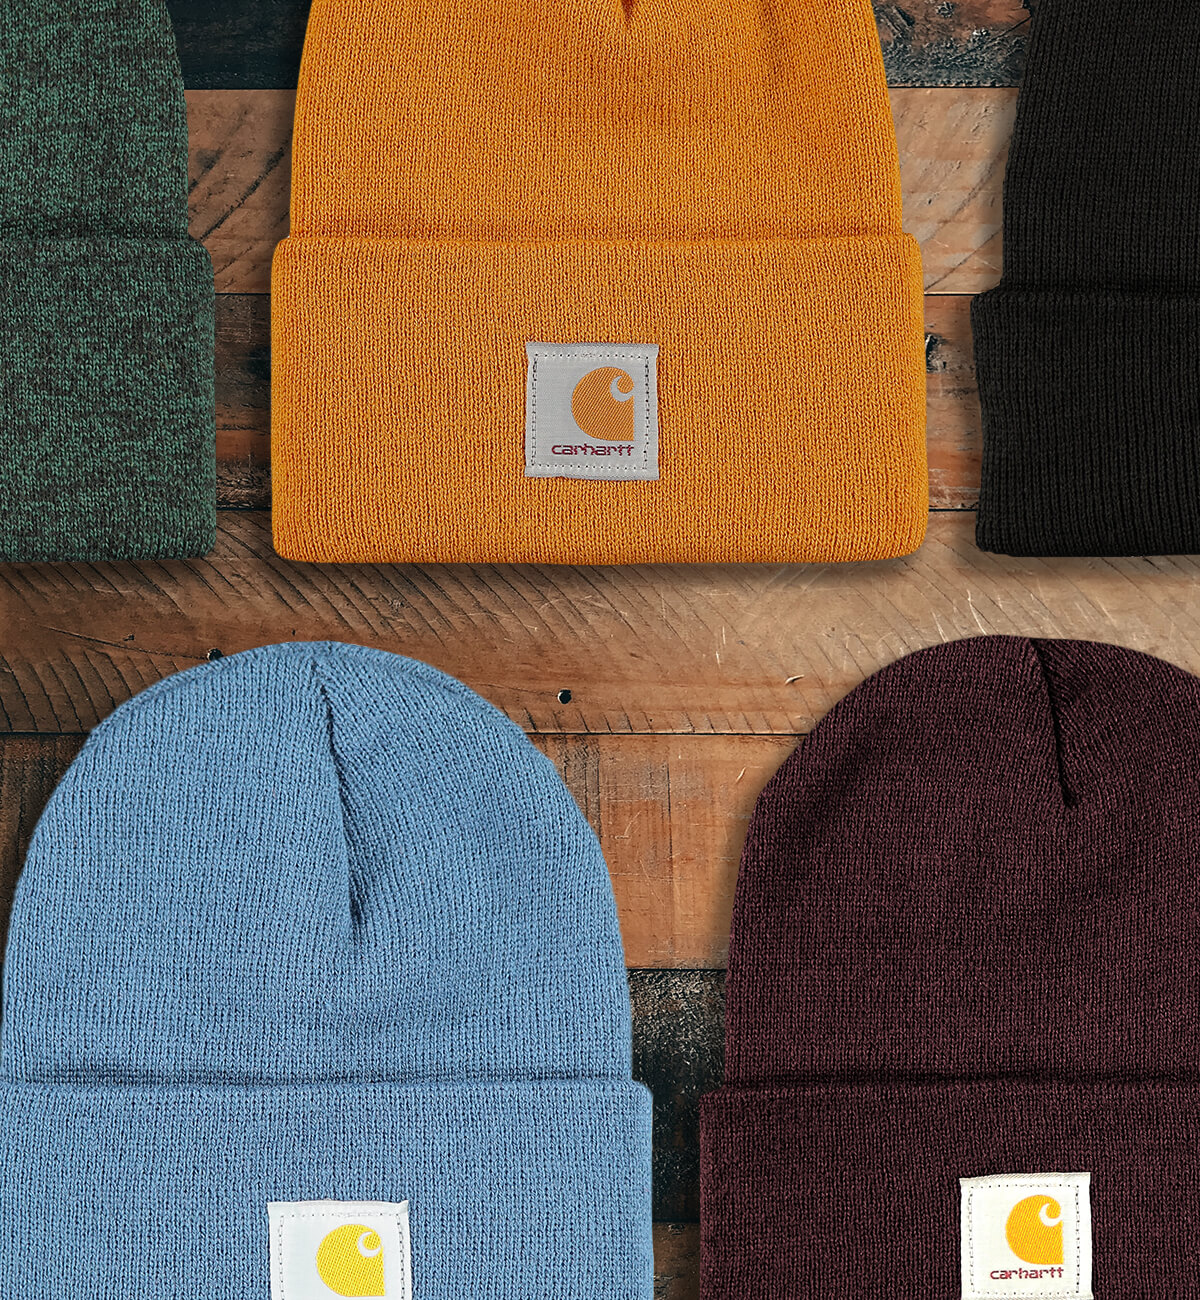 NEW ARRIVAL BEANIES FROM CARHARDTT & MORE - SHOP BEANIES